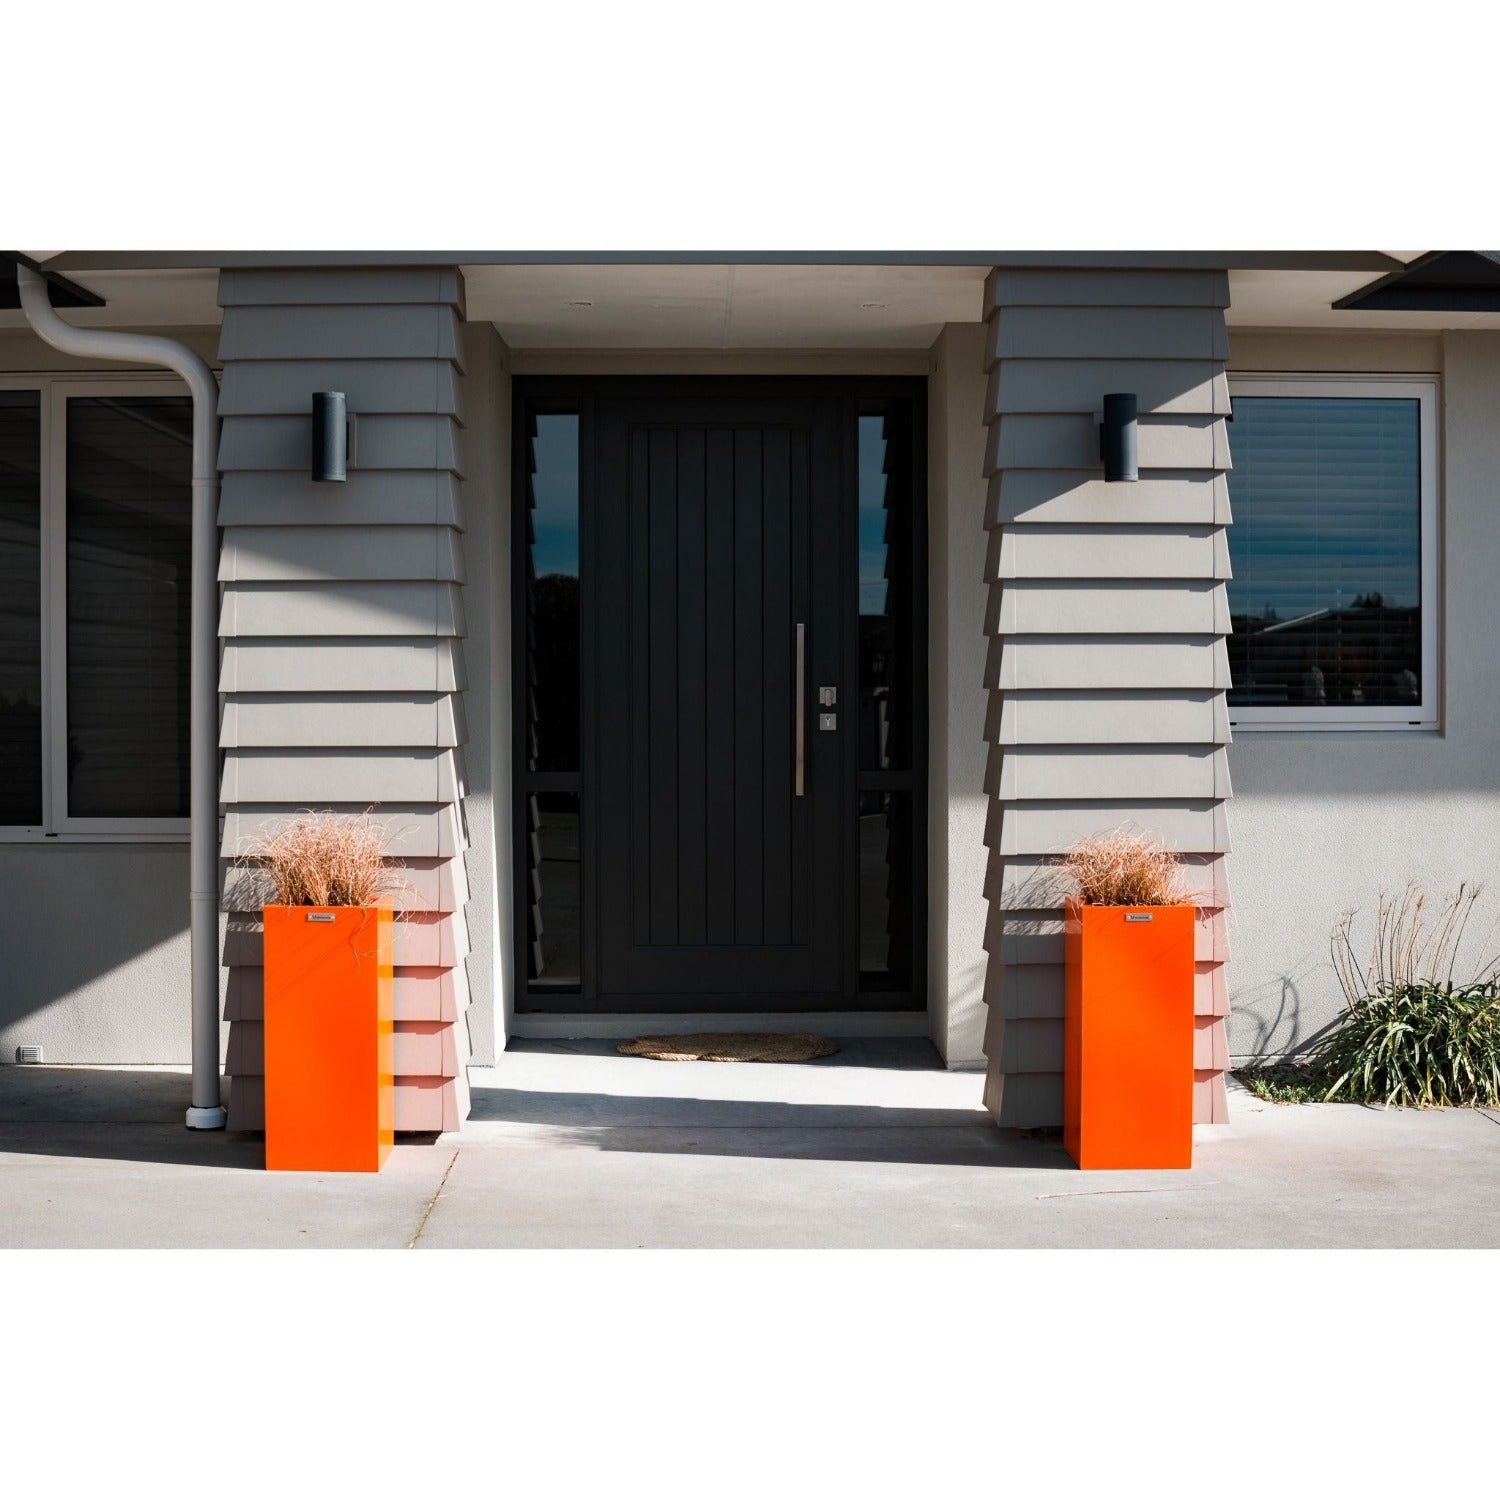 Two orange pot planters in front of house pillars.